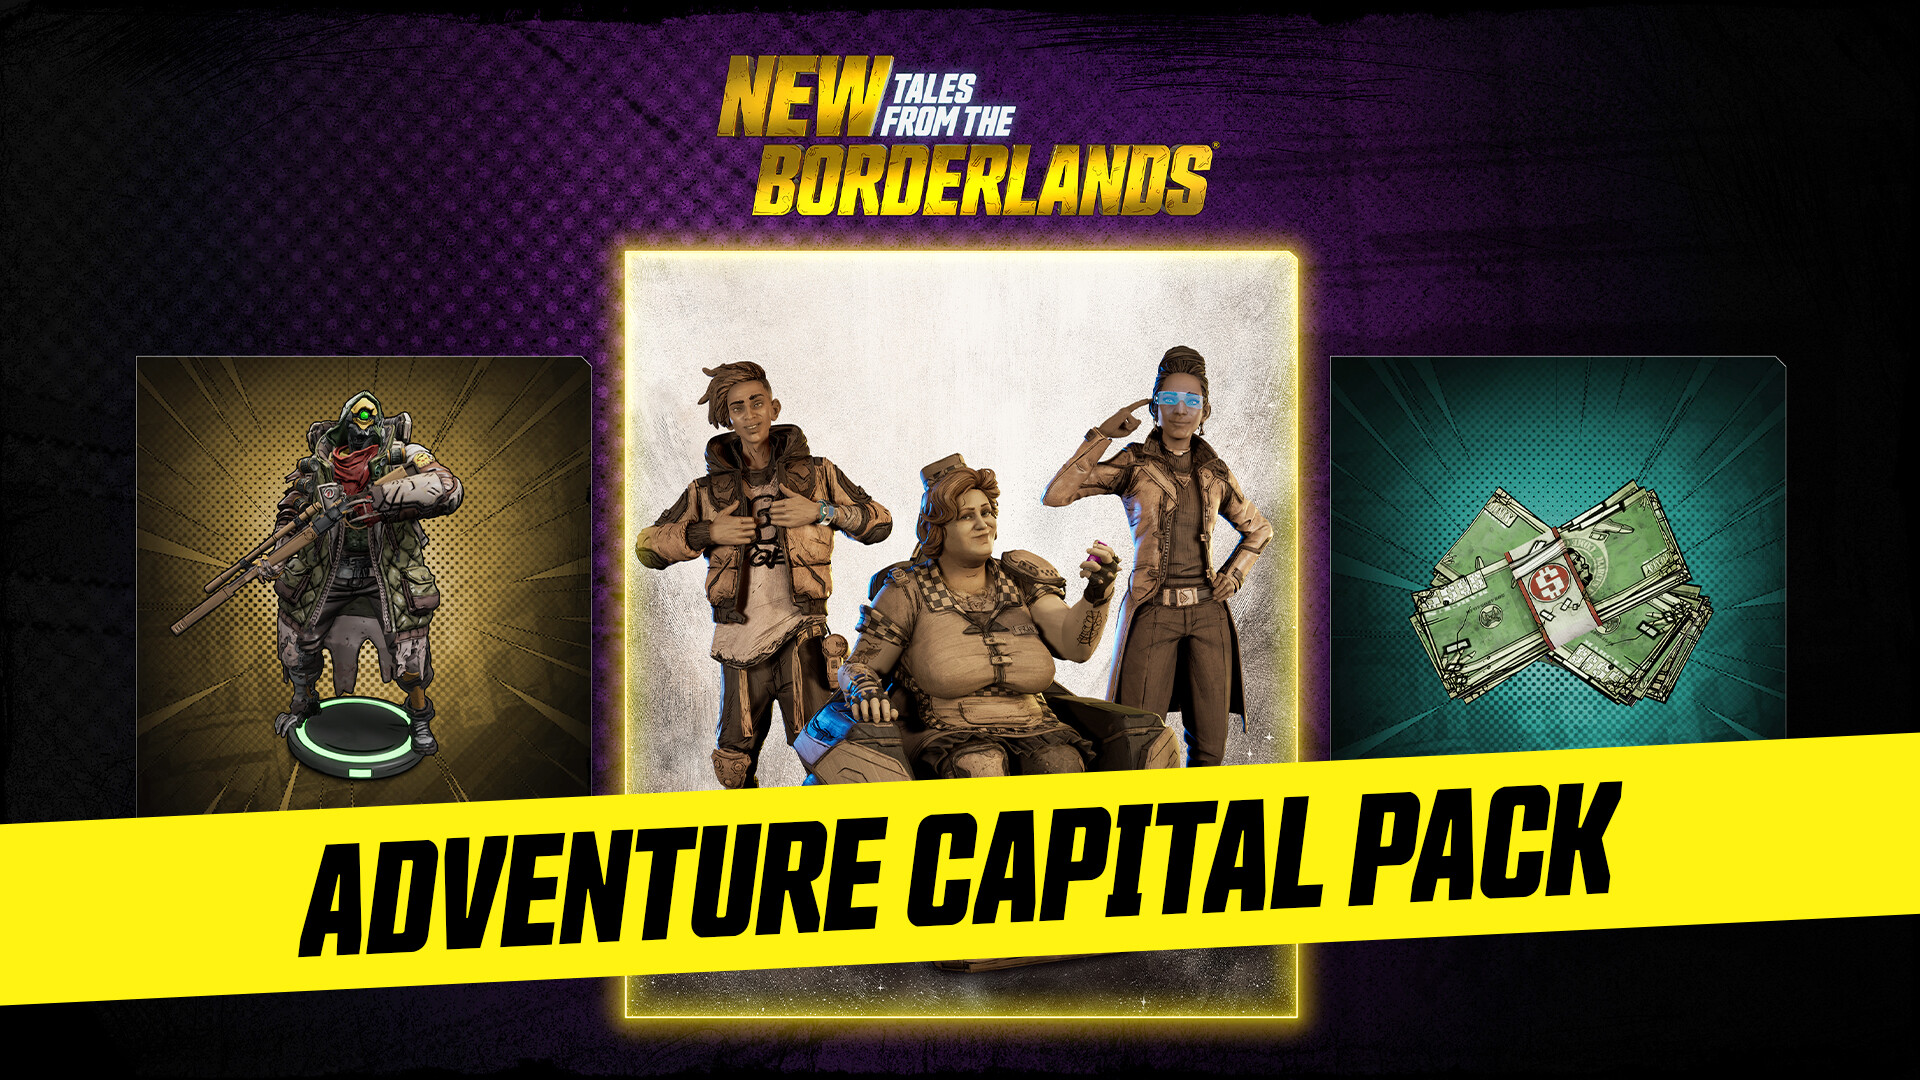 New Tales from the Borderlands: Adventure Capital Pack Featured Screenshot #1